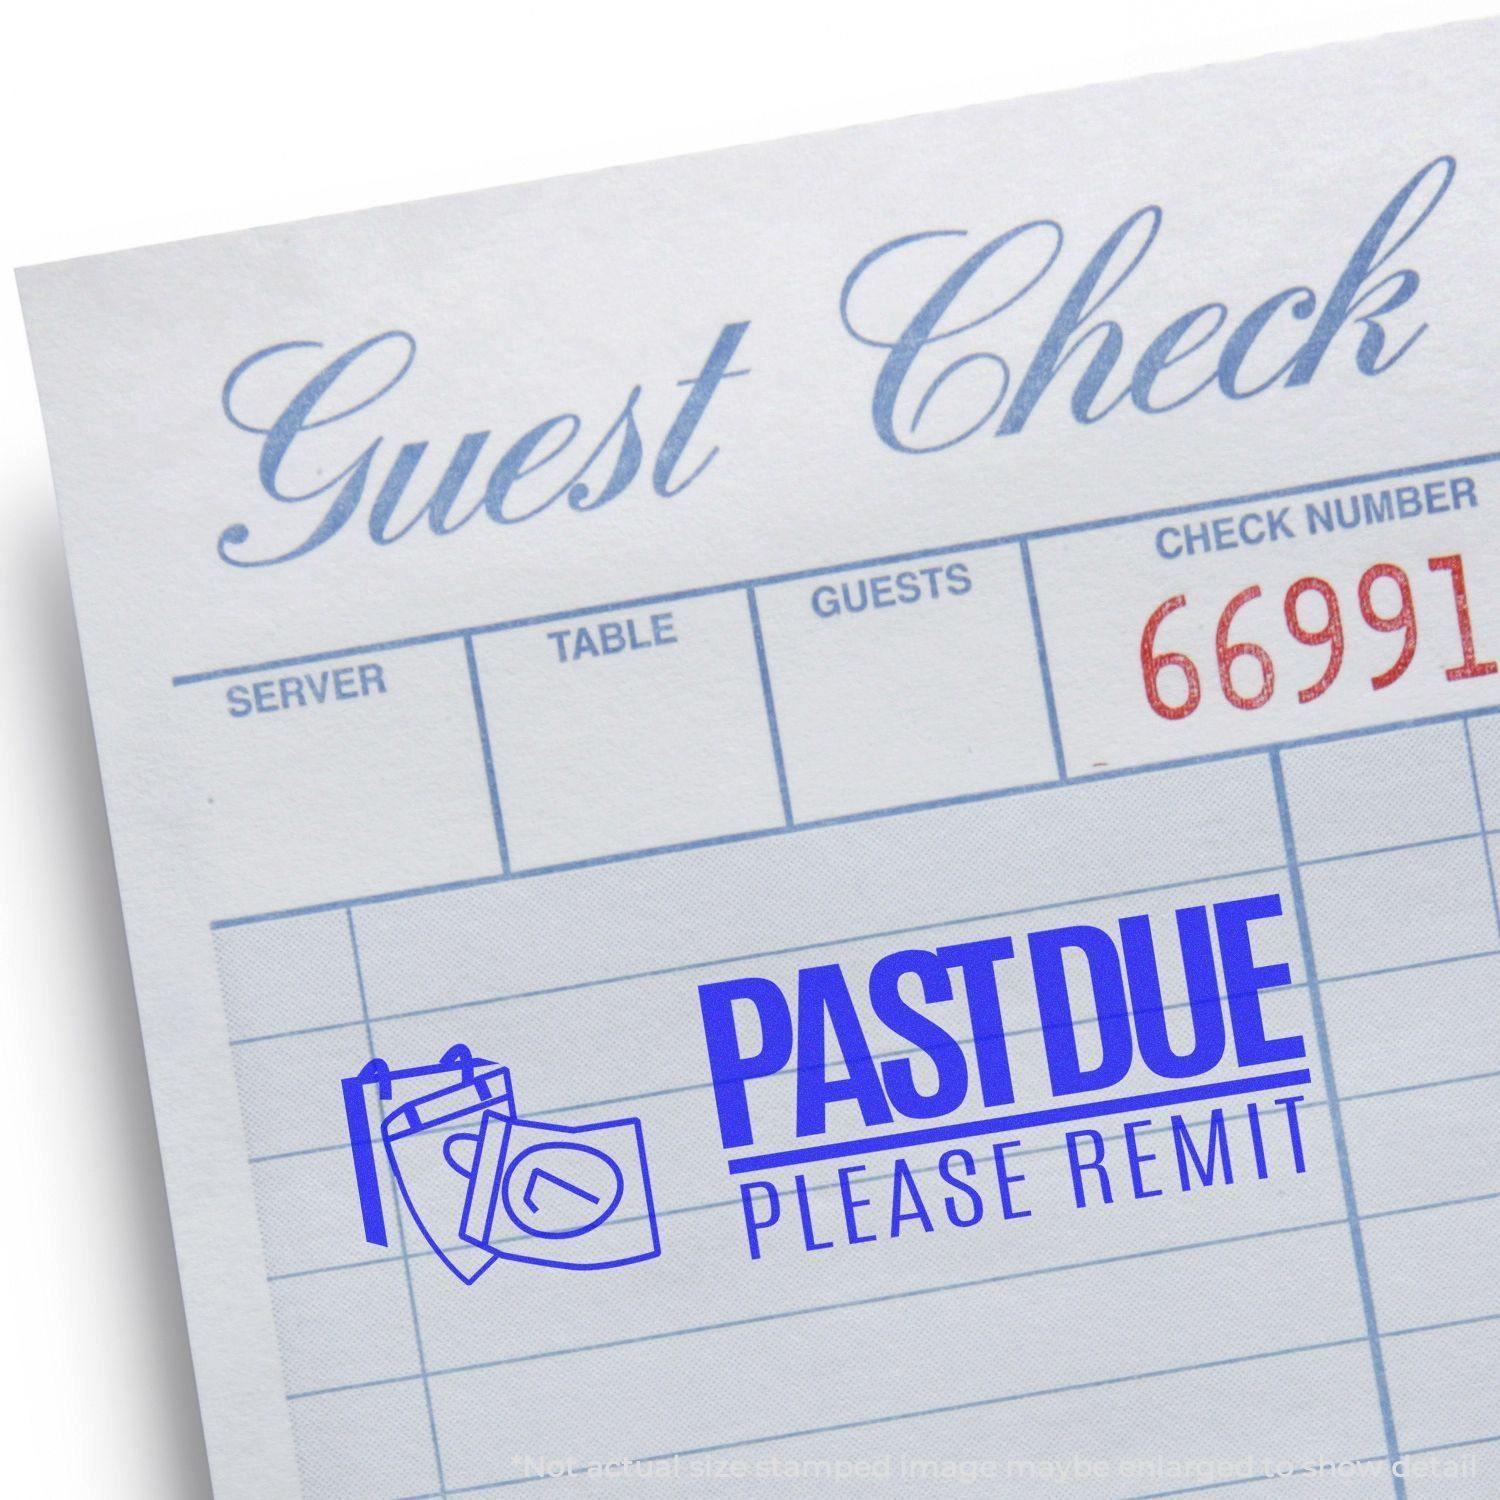 A stock office rubber stamp with a stamped image showing how the text "PAST DUE PLEASE REMIT" with a calendar icon on the left side is displayed after stamping.